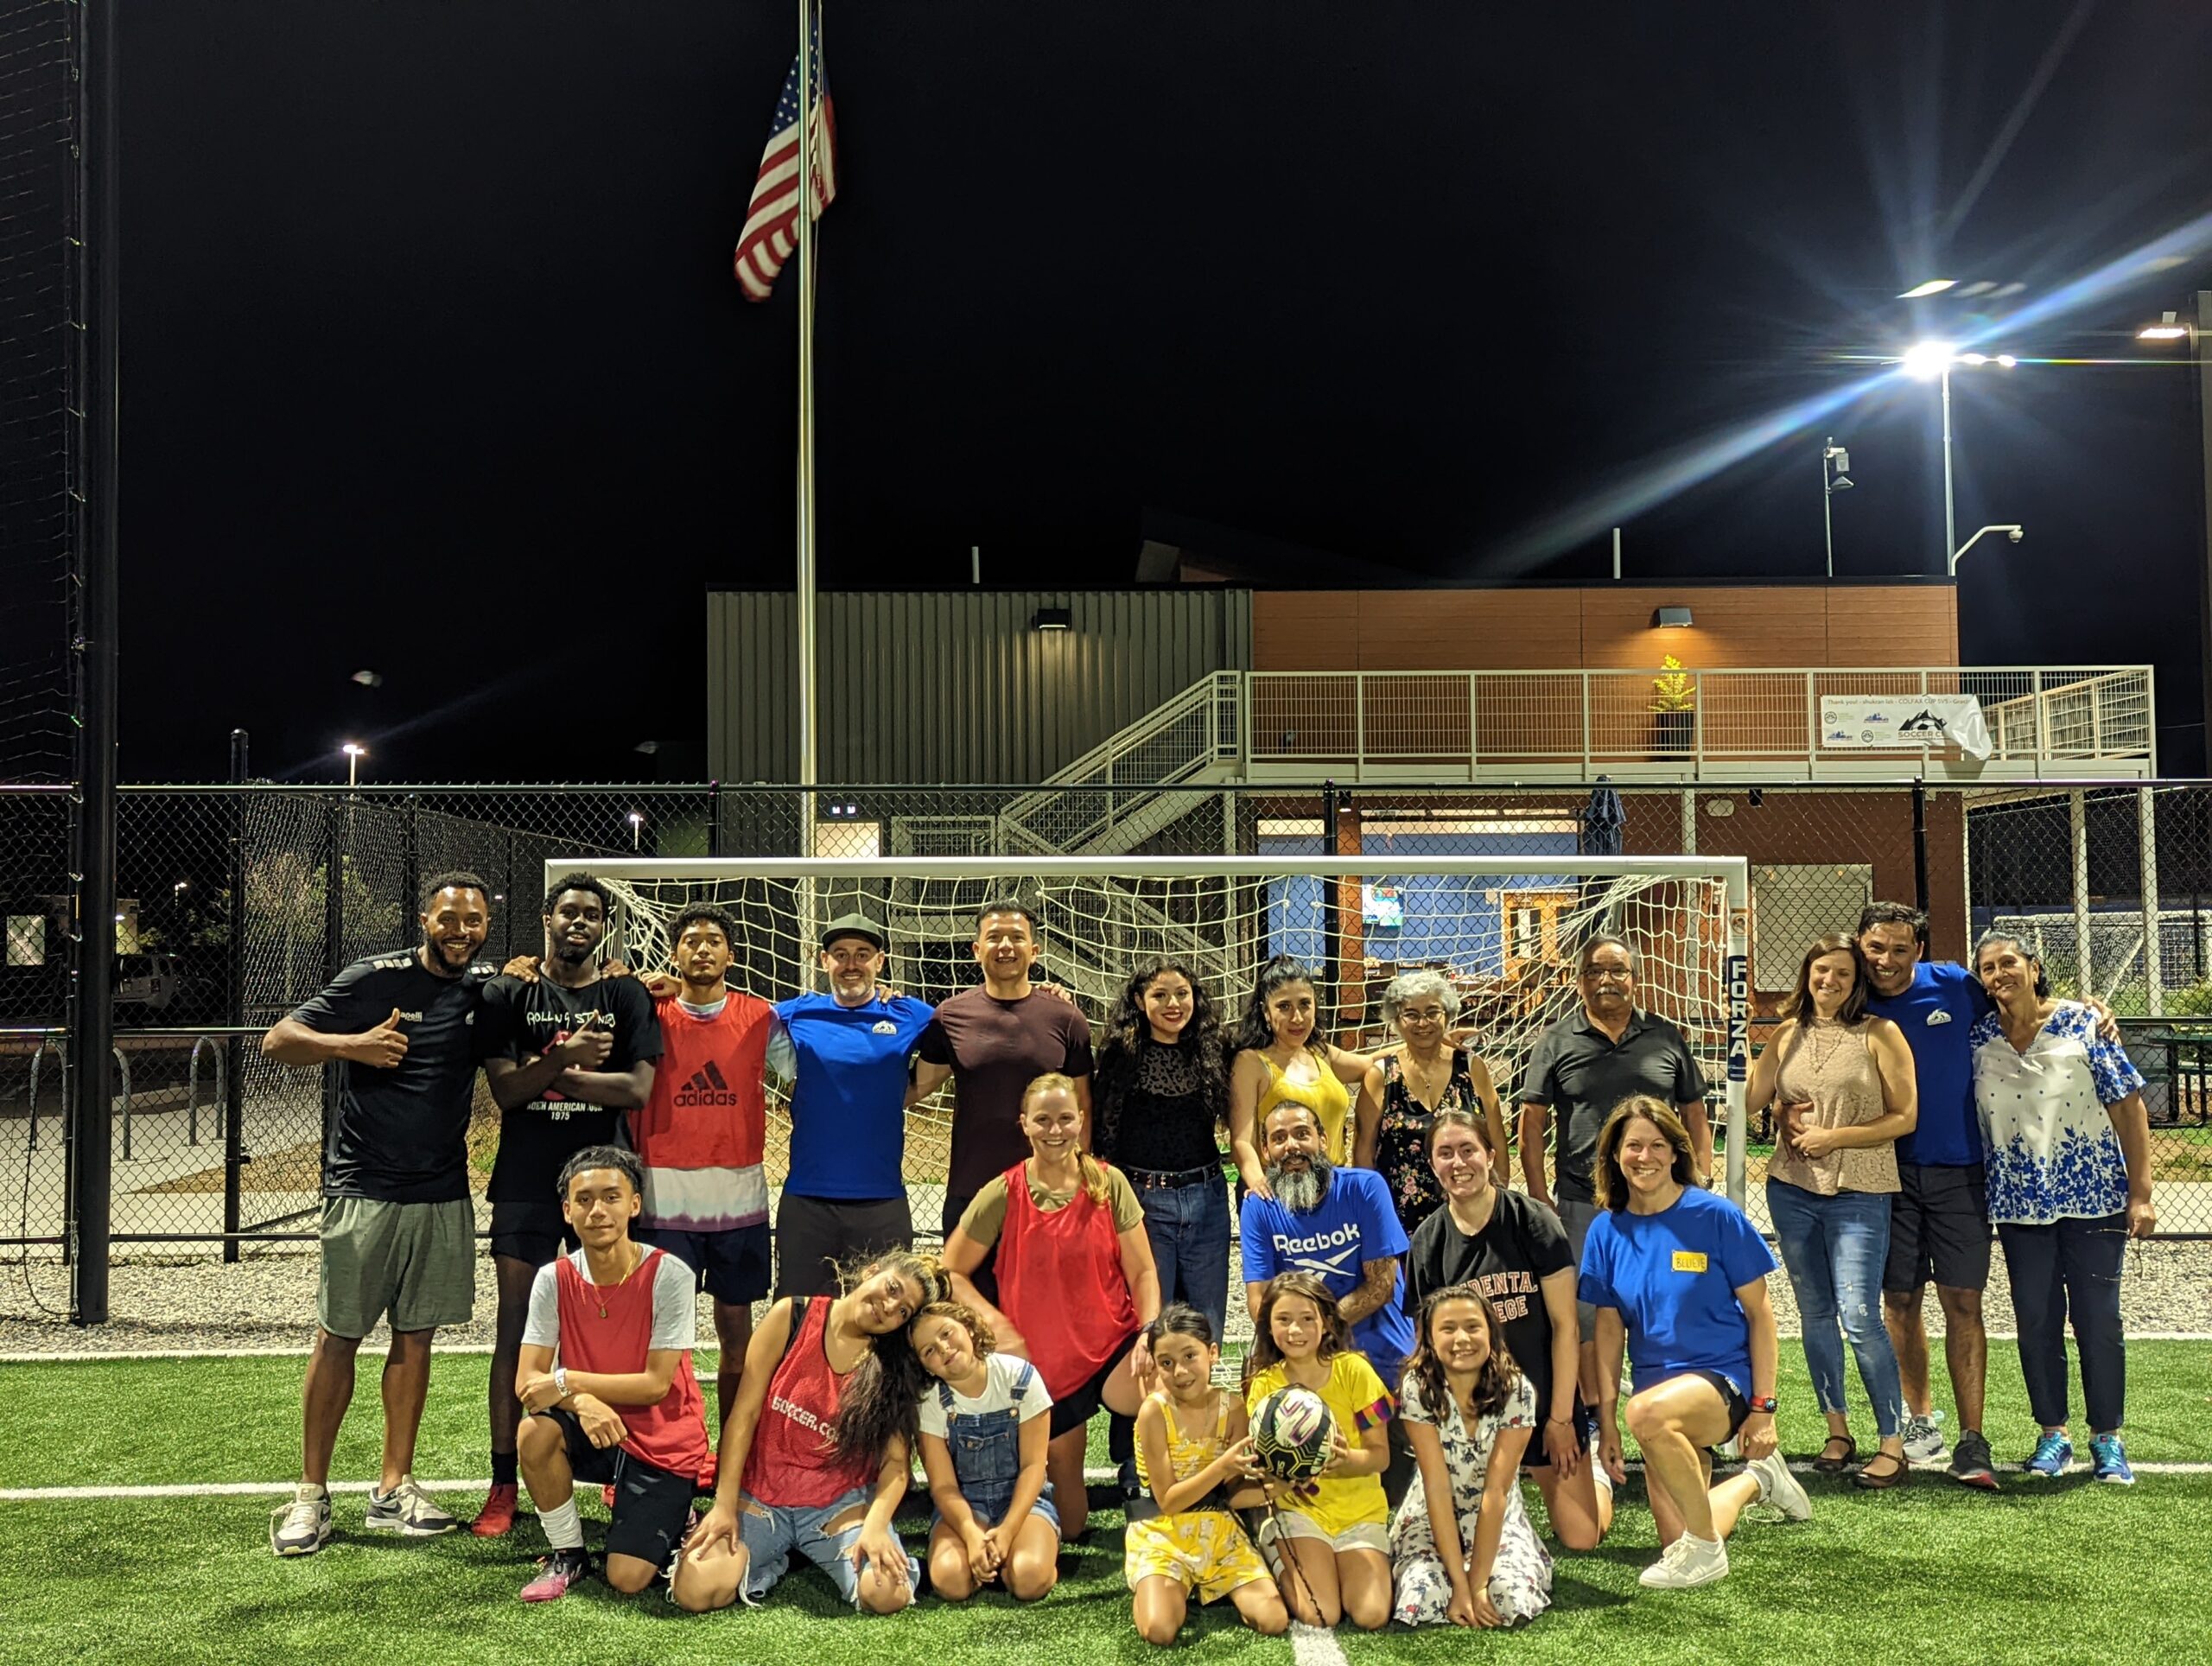 About the Colorado Soccer Foundation